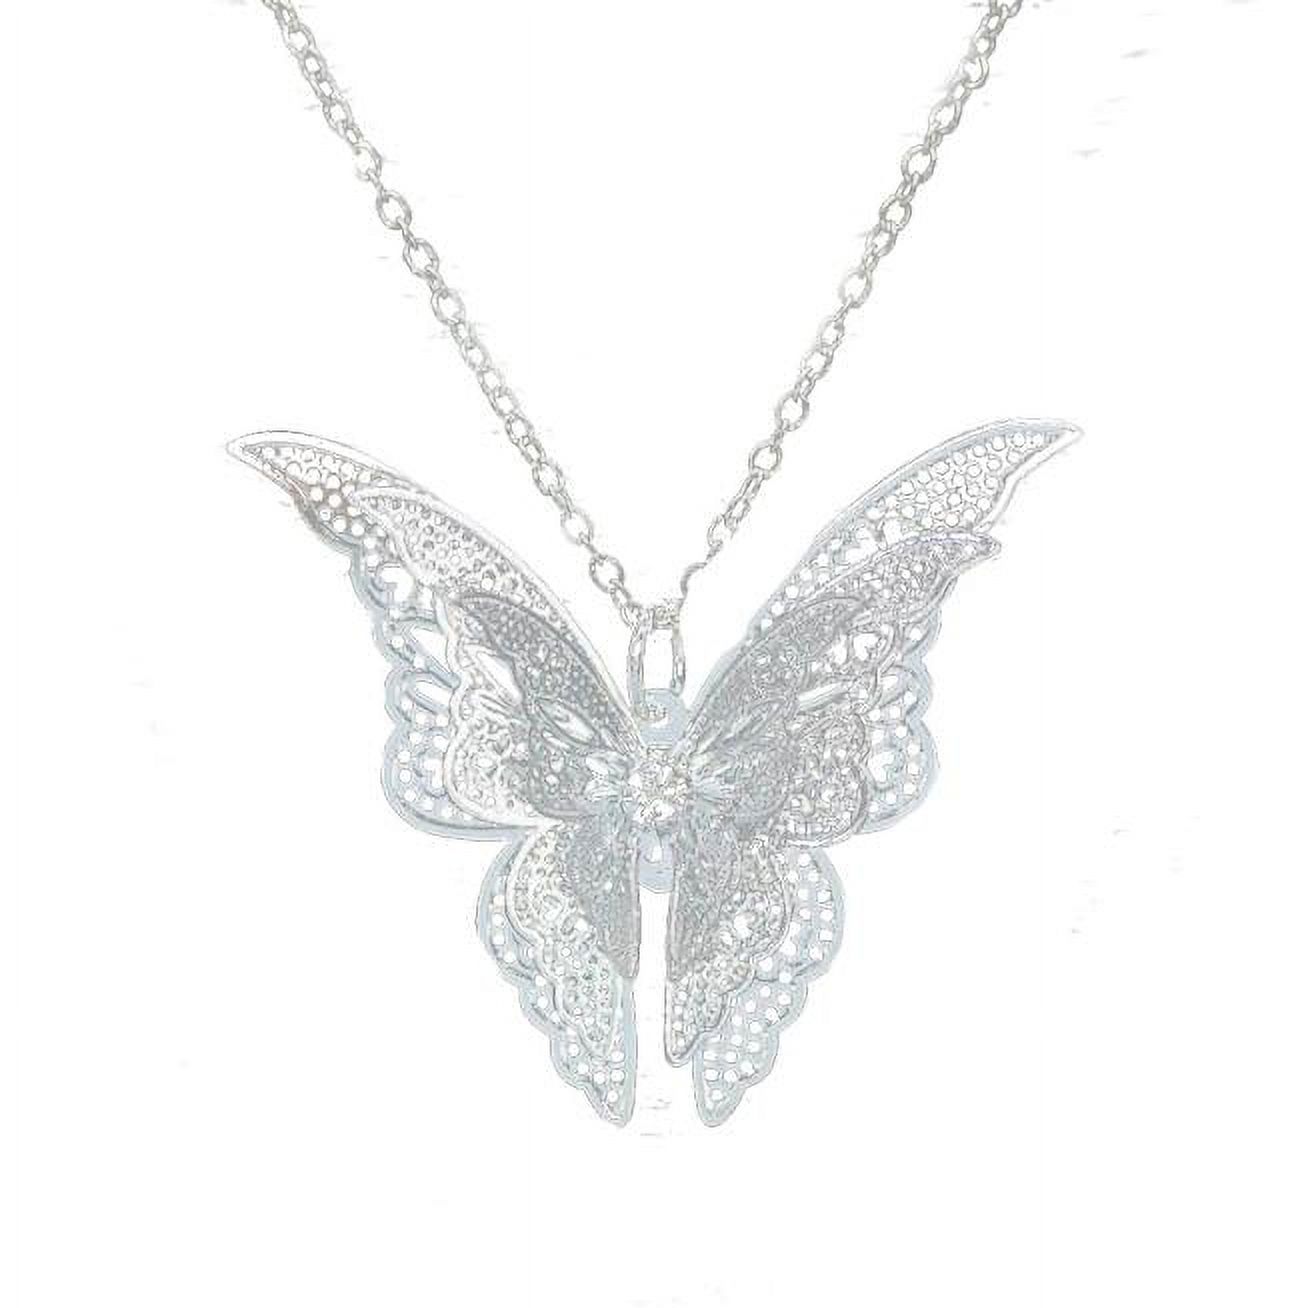 Deals of the Day,Jovati Women Pendant Lovely Silver Butterfly Pendant Chain Necklace Alloy Jewelry Gift on Clearance - image 1 of 4